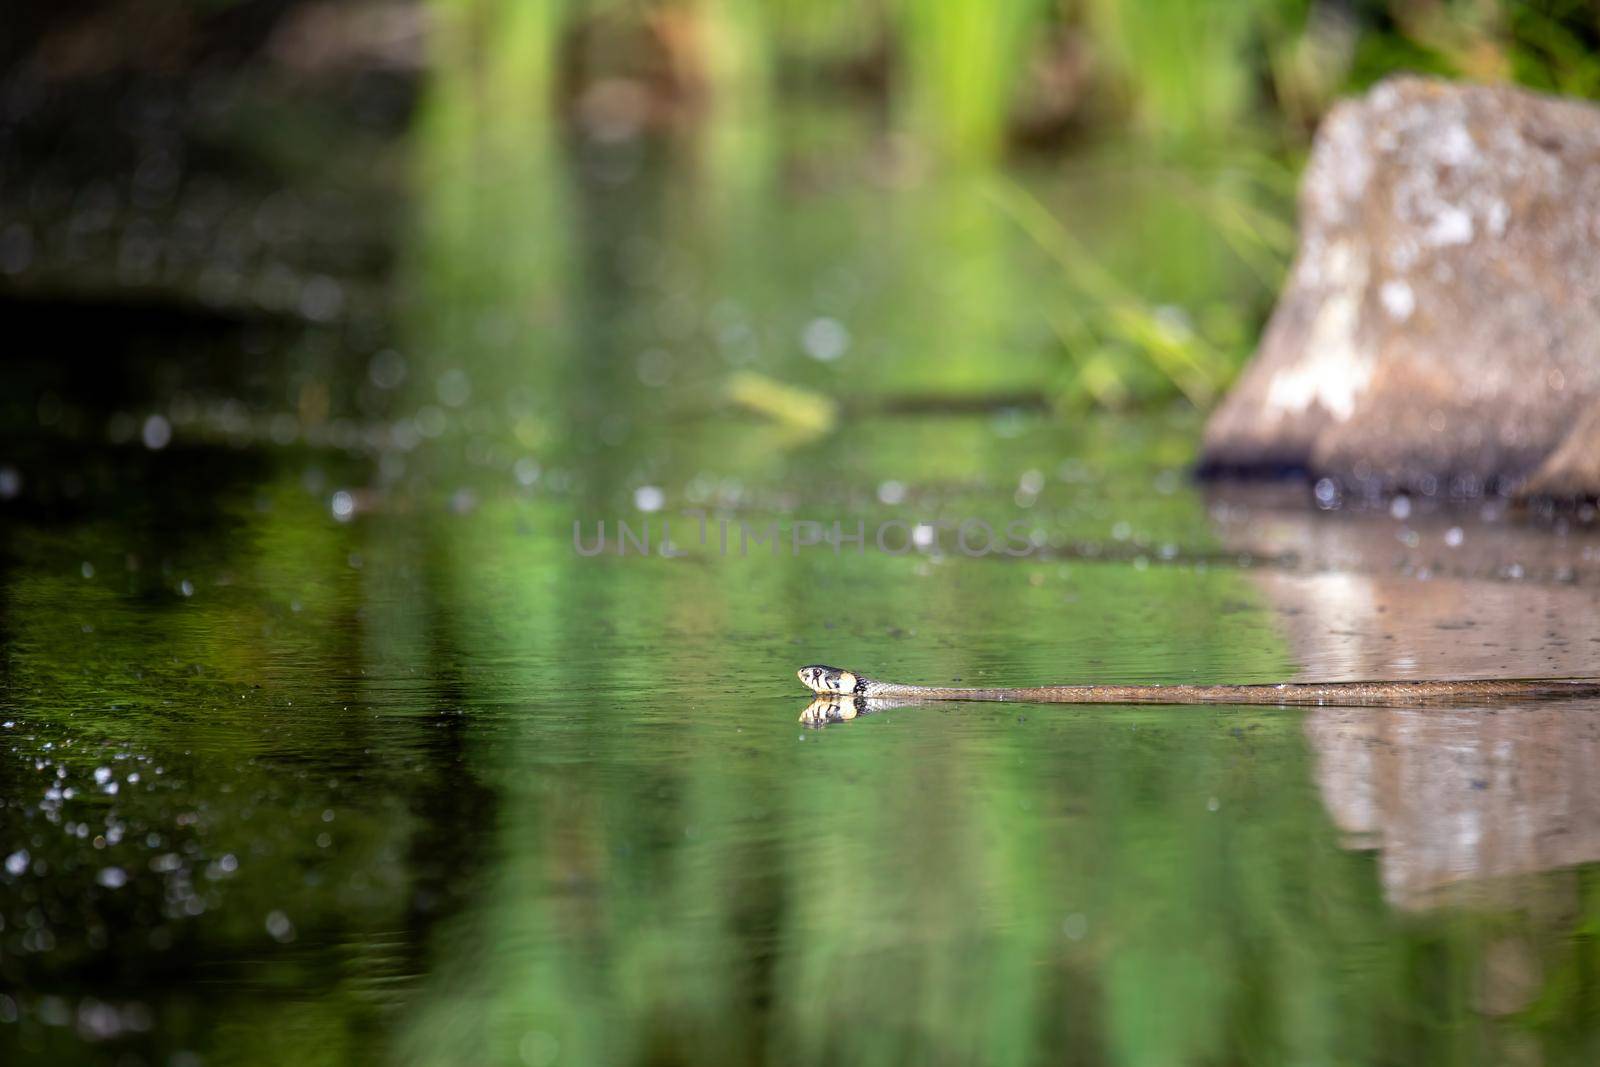 The grass snake Natrix natrix swims in the water with green reflection, fishing for fish. Czech Republic, Europe wildlife